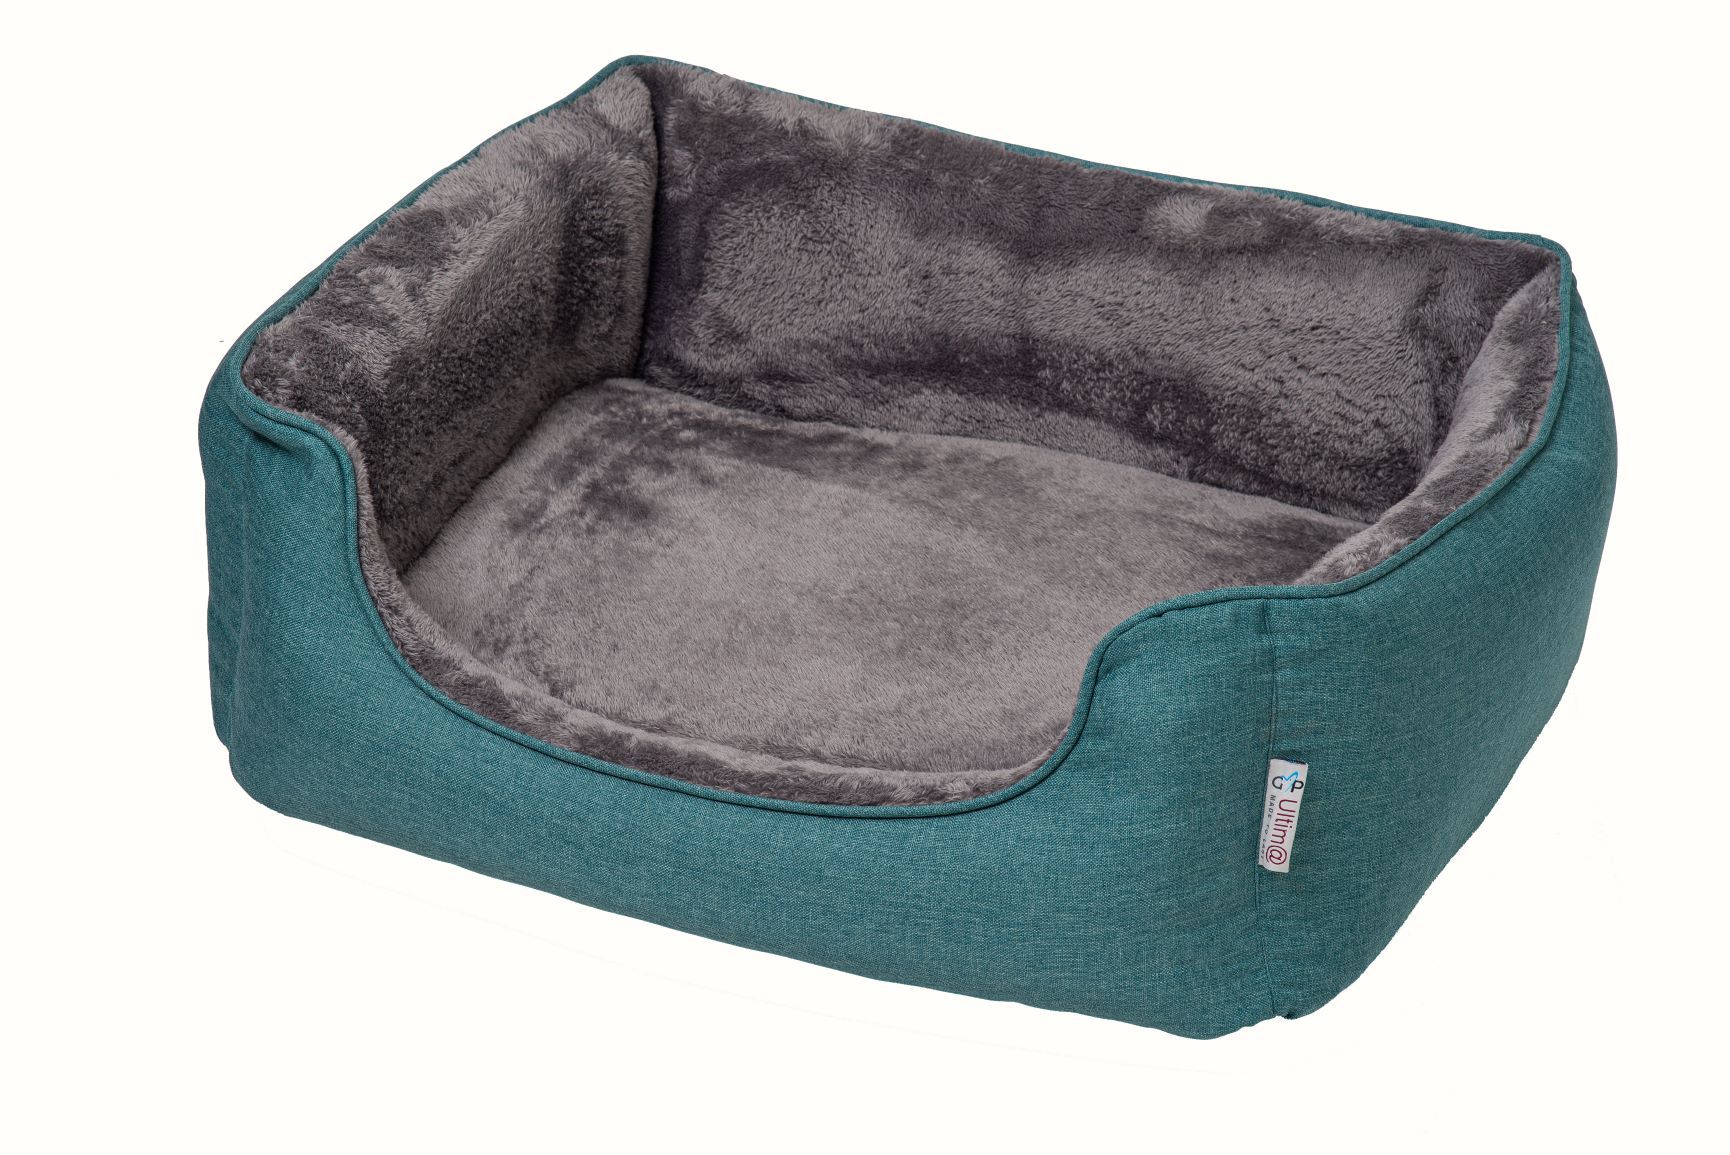 Ultima_Teal_Bed_Single